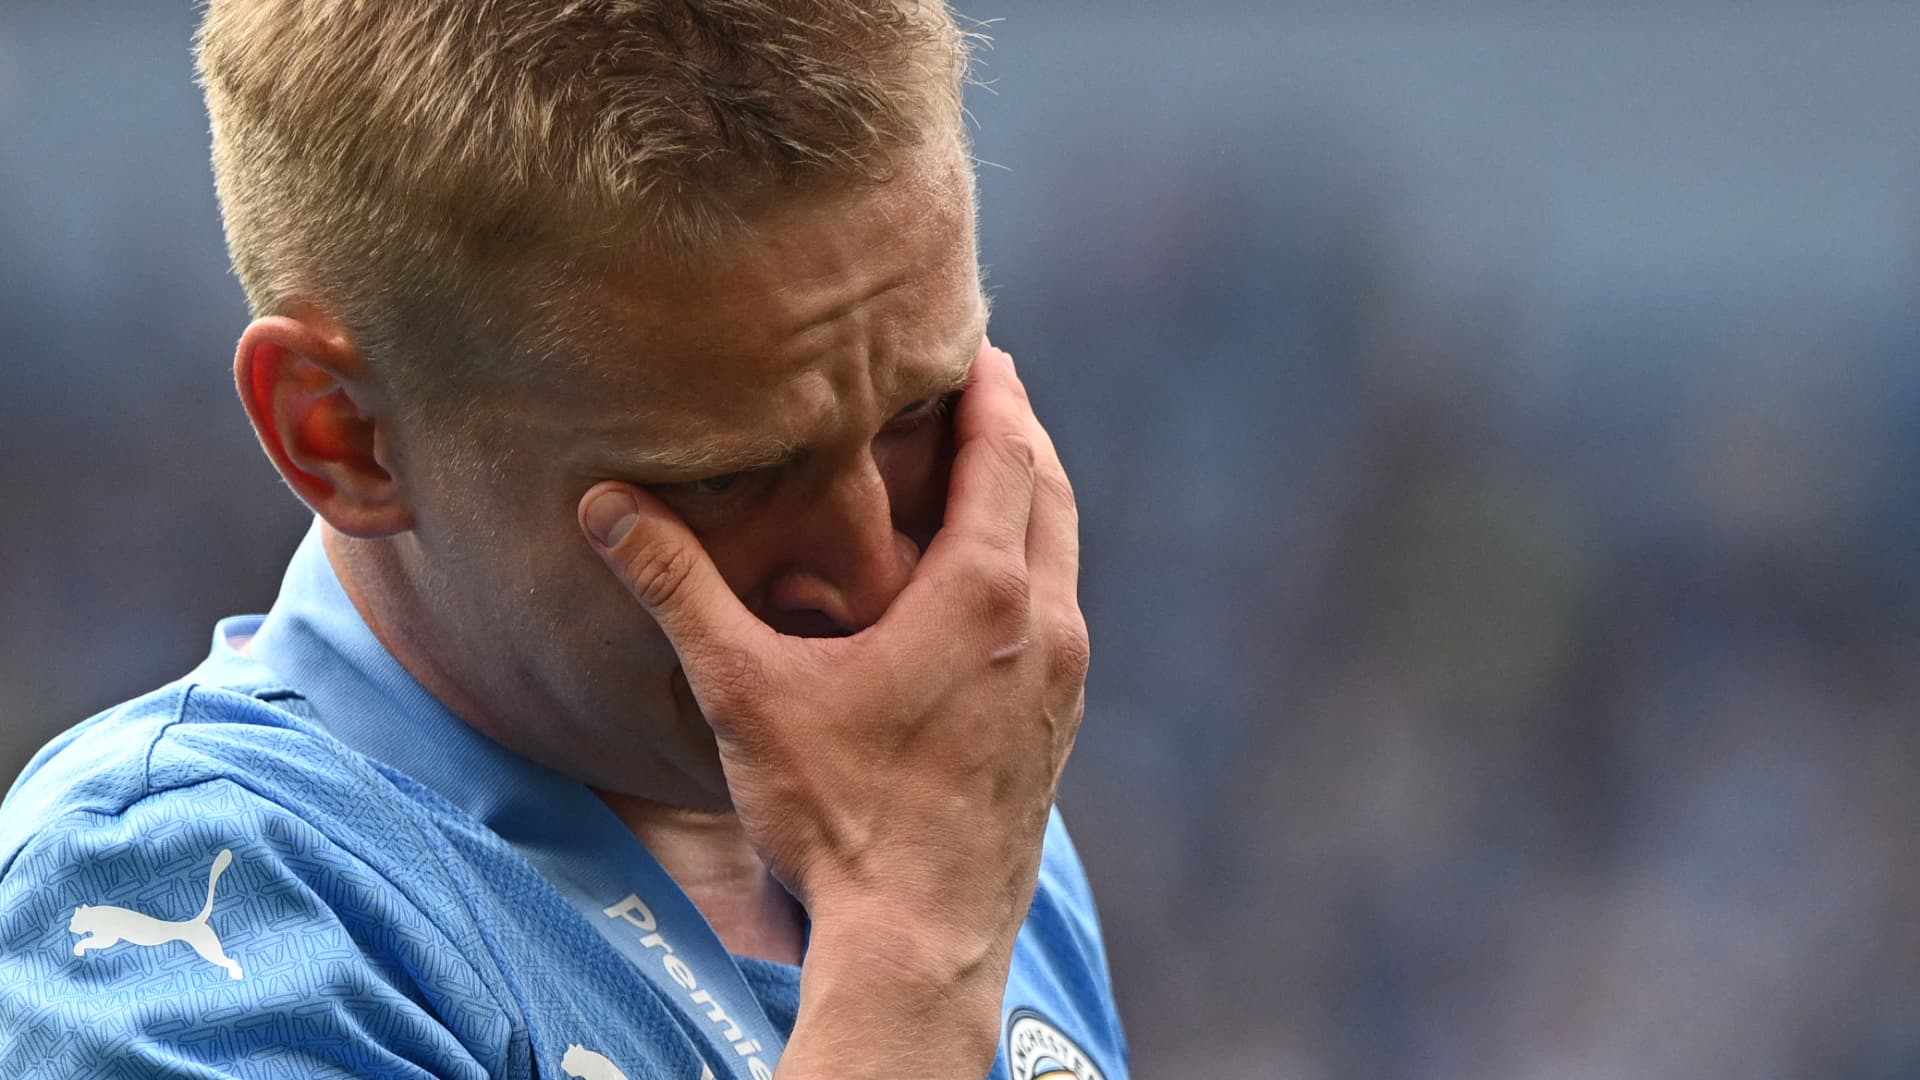 Manchester City's Ukrainian midfielder Oleksandr Zinchenko reacts to seeing the Ukrainian flag on the trophy as City players celebrate on the pitch after the English Premier League football match between Manchester City and Aston Villa at the Etihad Stadium in Manchester, north west England, on May 22, 2022. 